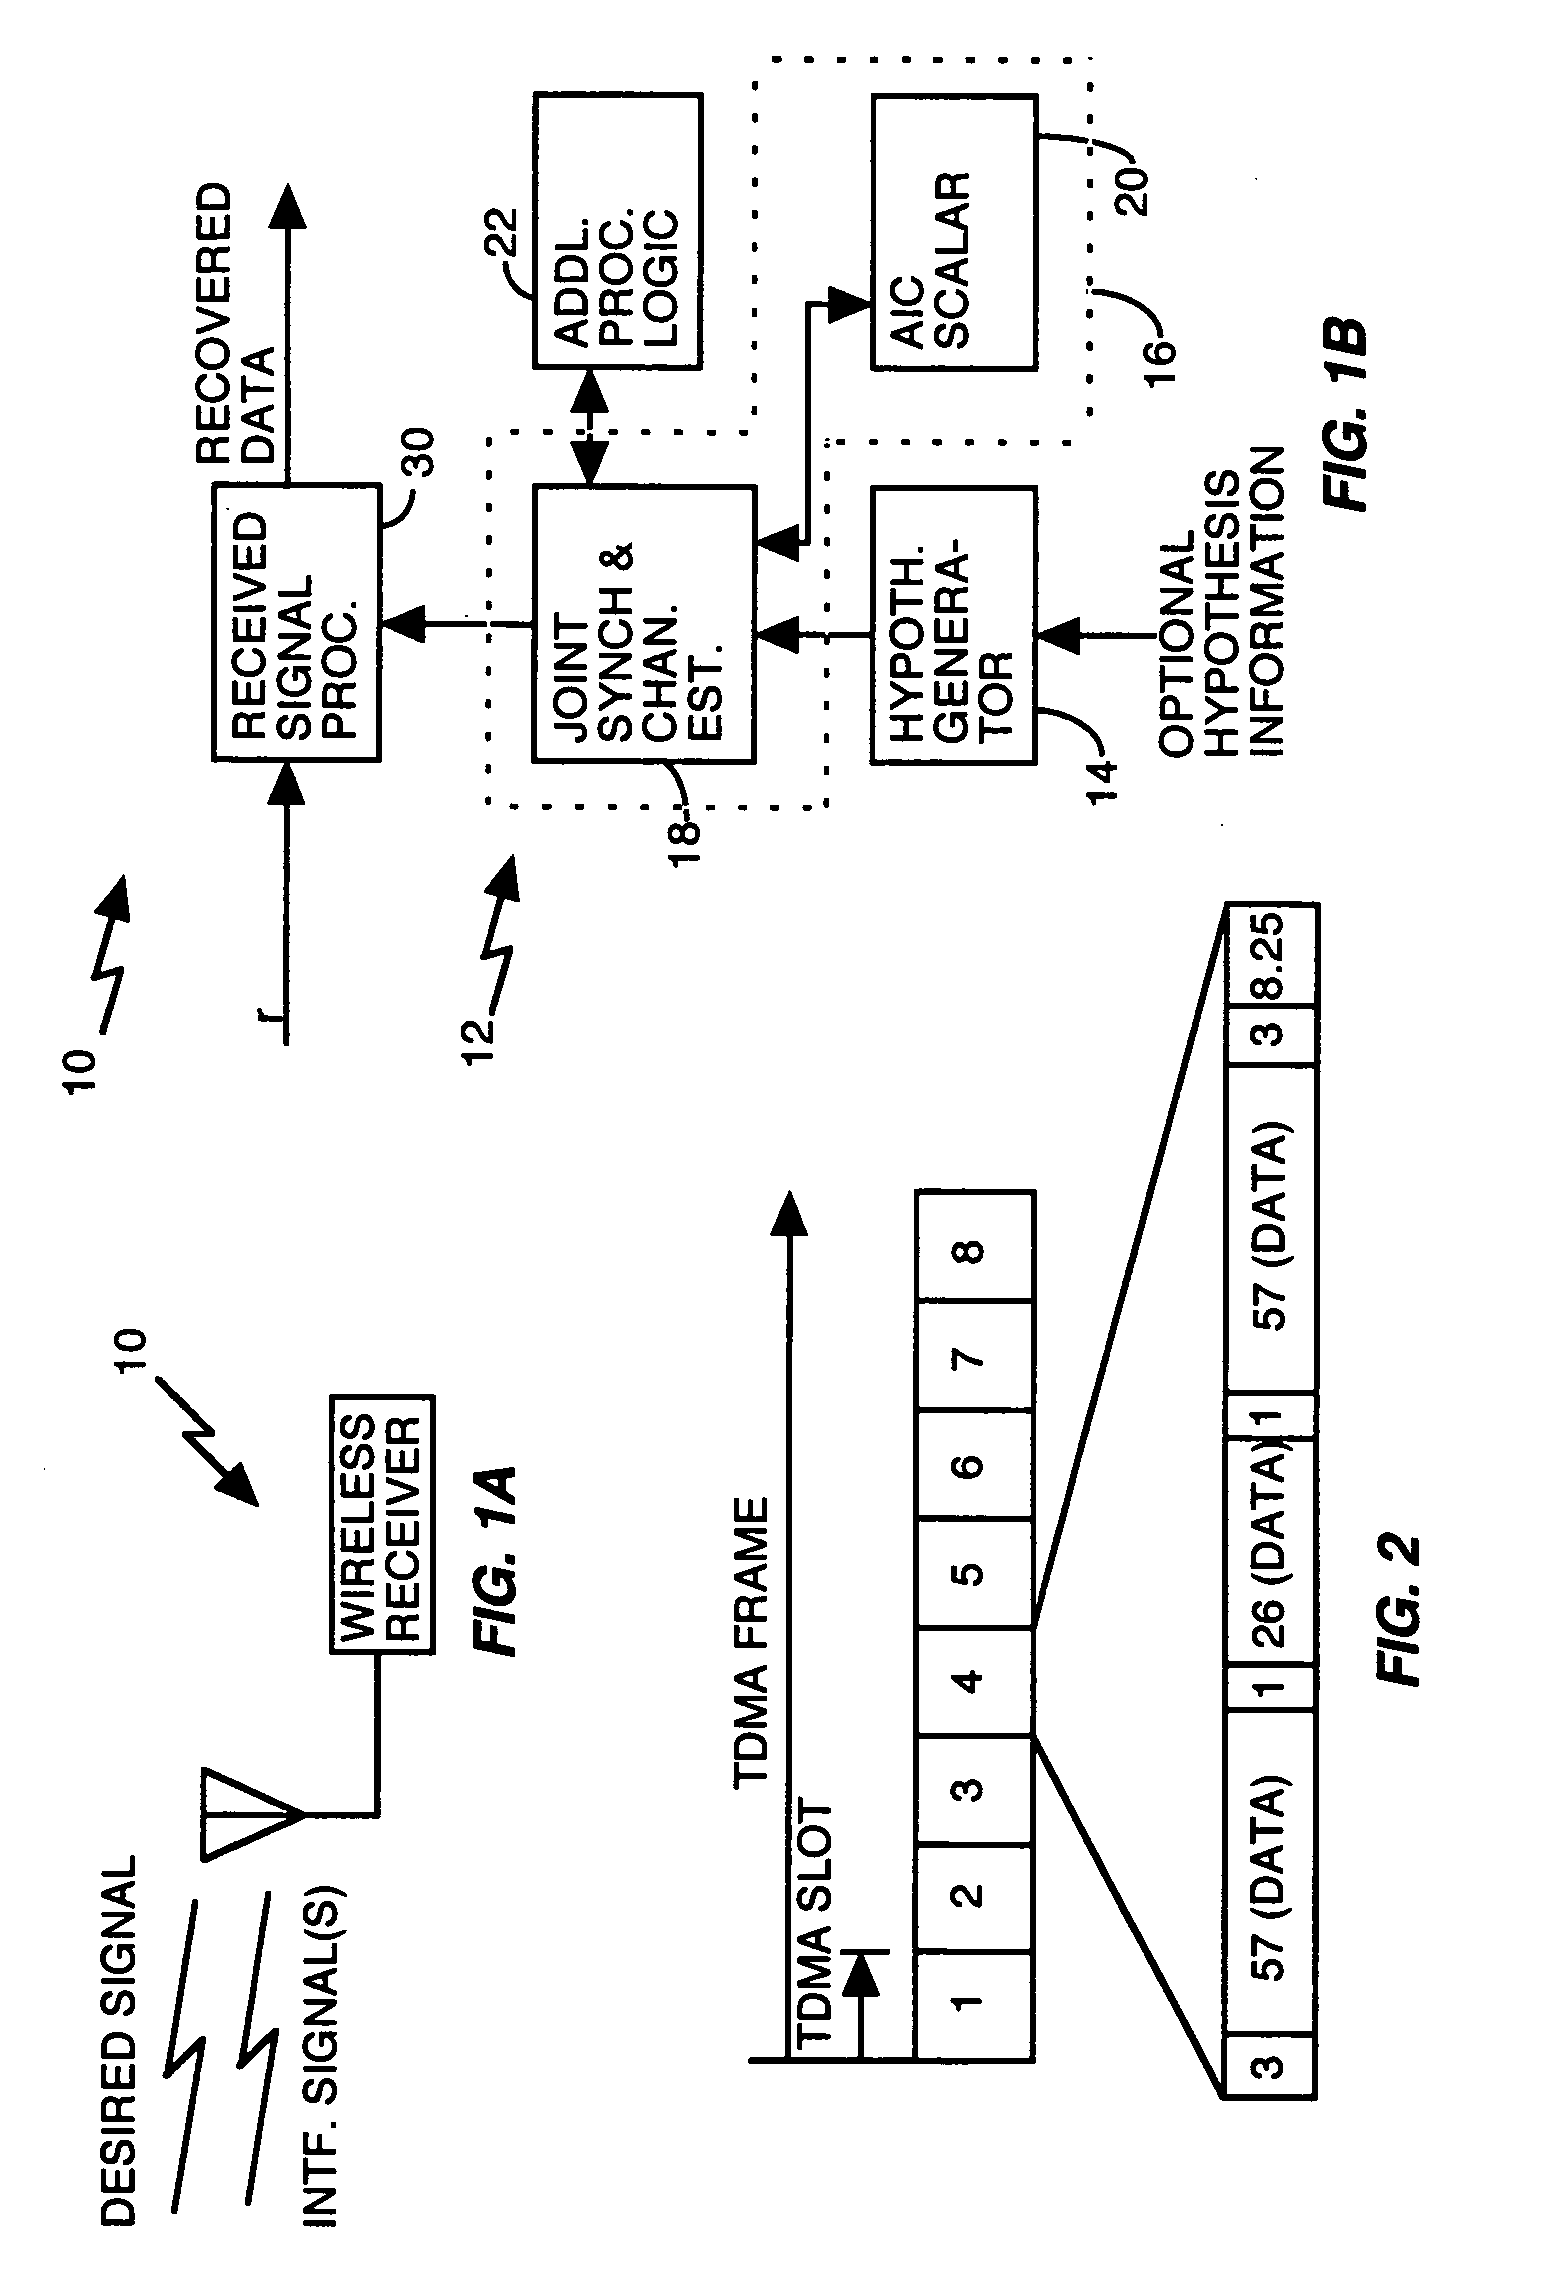 Method and apparatus for multi-user interference determination an rejection